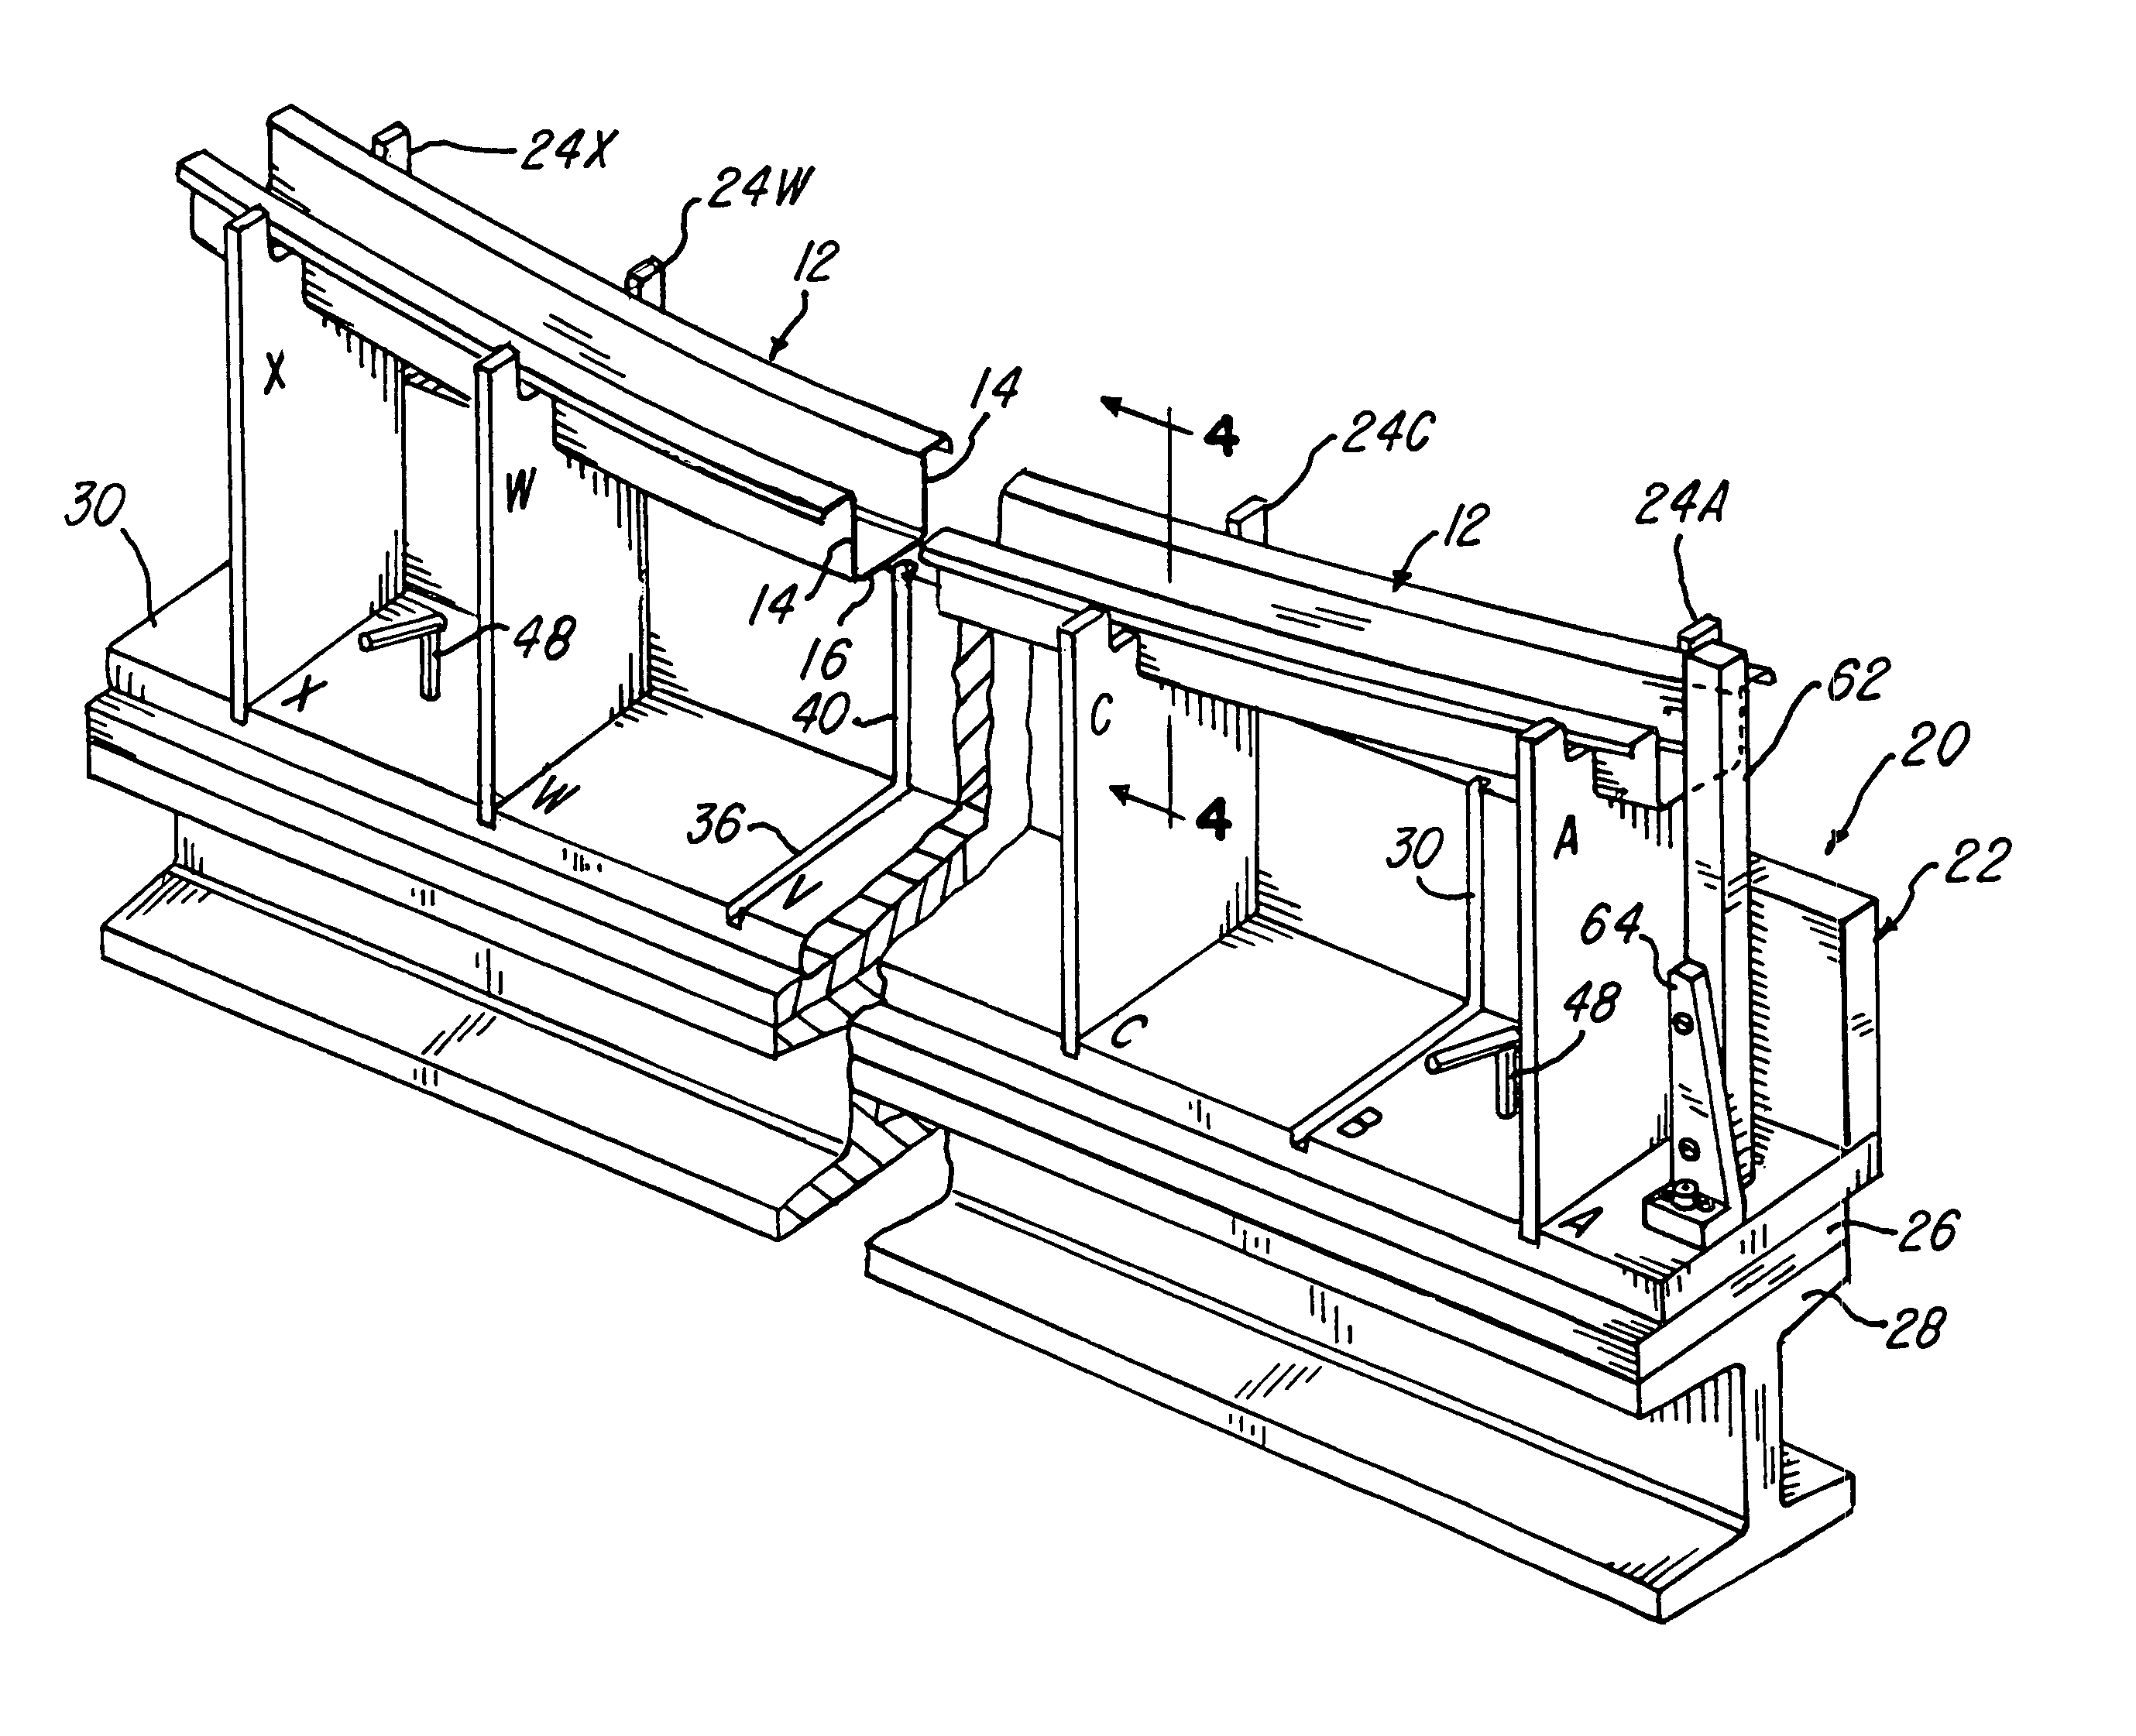 Stringer check fixture and method